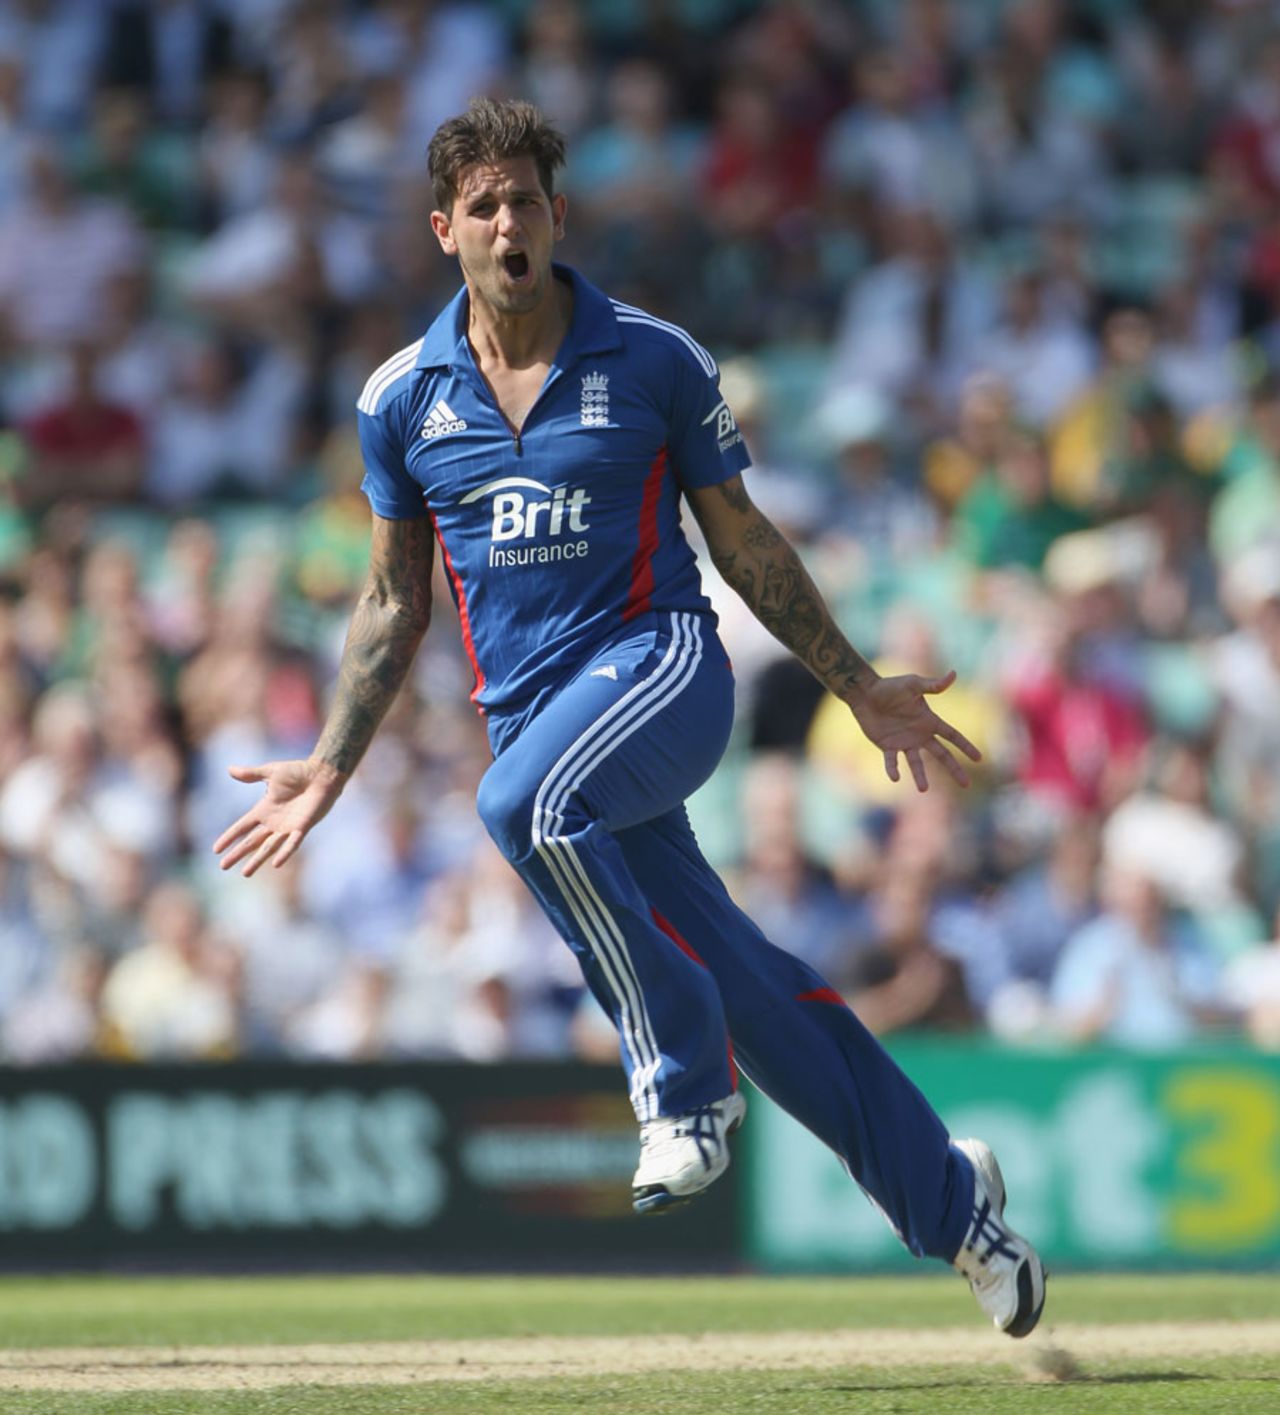 Jade Dernbach enjoyed dismissing Hashim Amla at his home ground, England v South Africa, 3rd NatWest ODI, The Oval, August 31, 2012